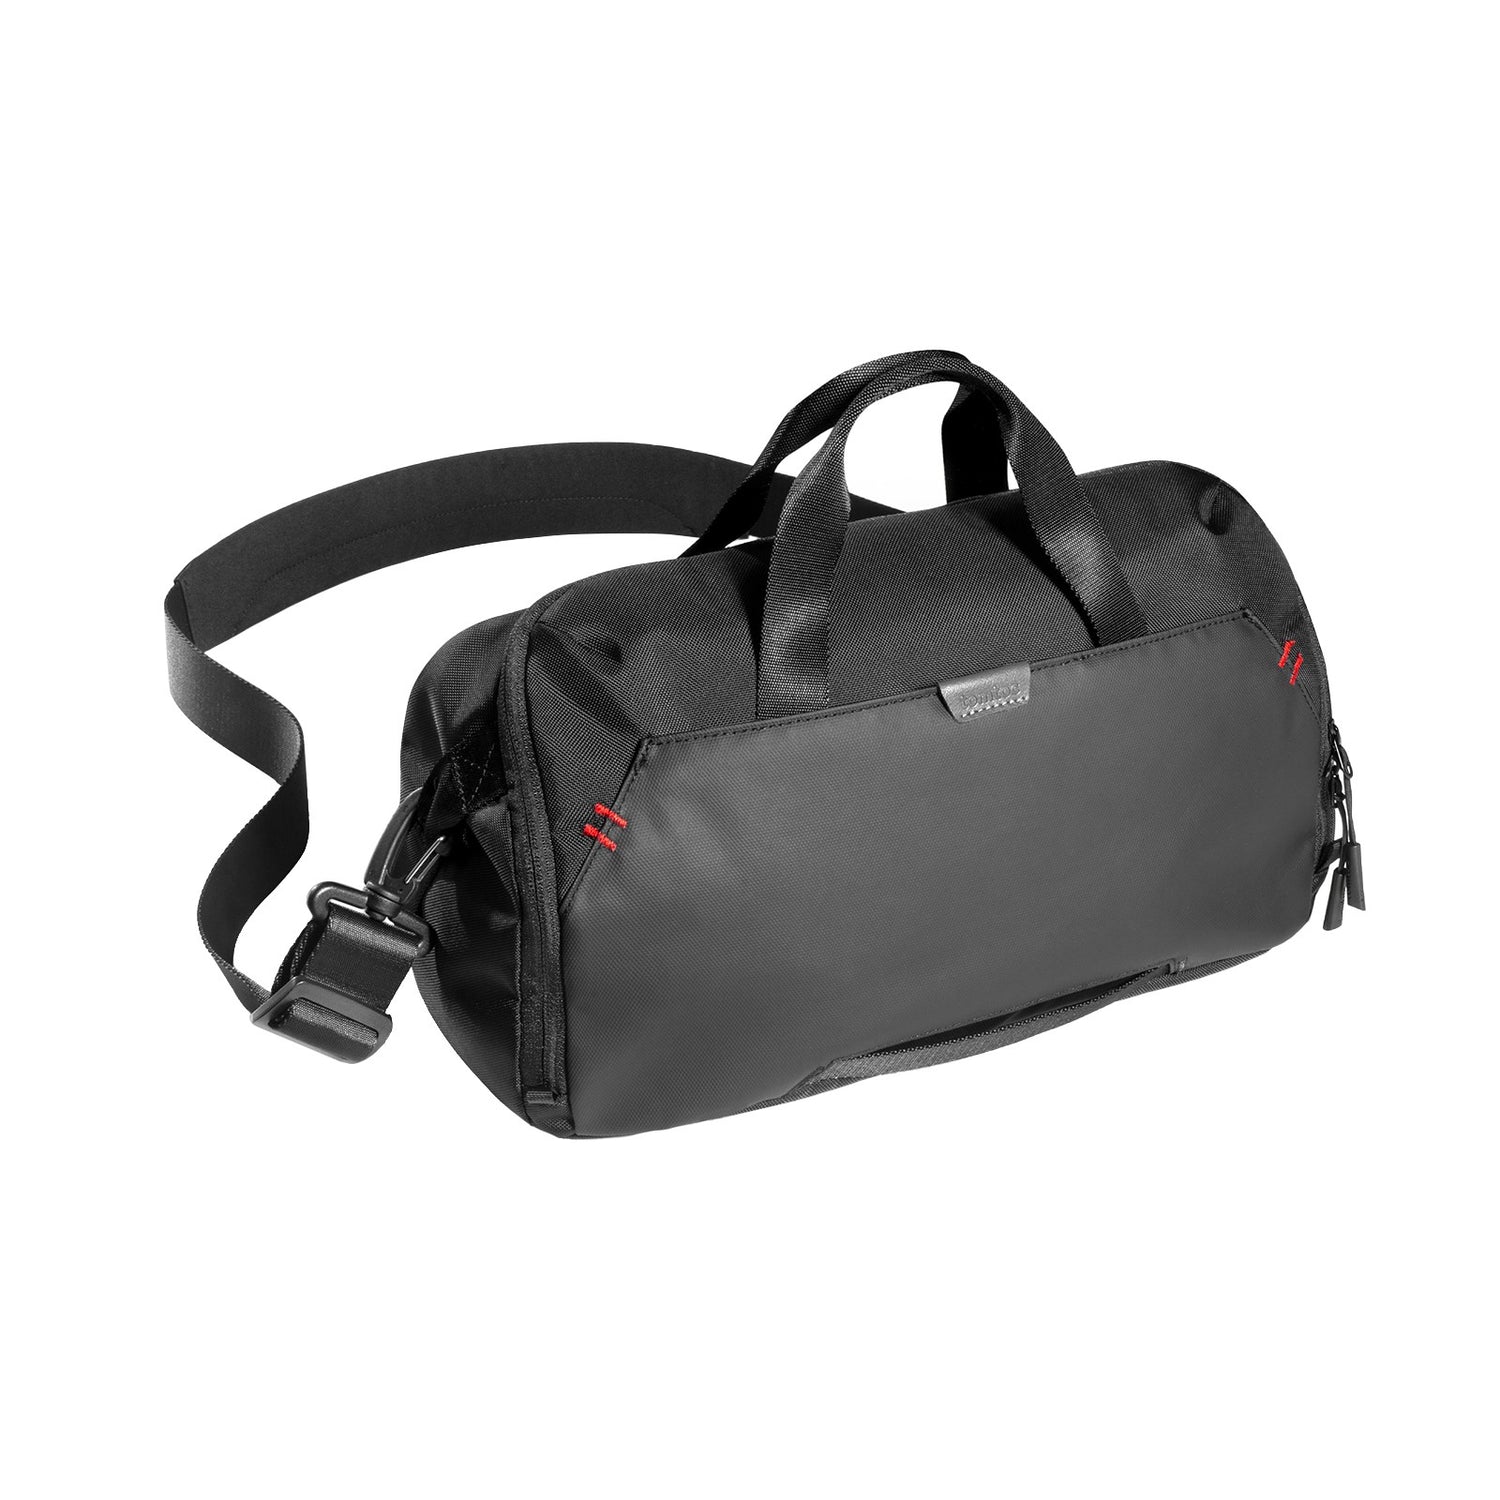 tomtoc Arccos Series Travel Bag for Nintendo Switch and OLED Model | B